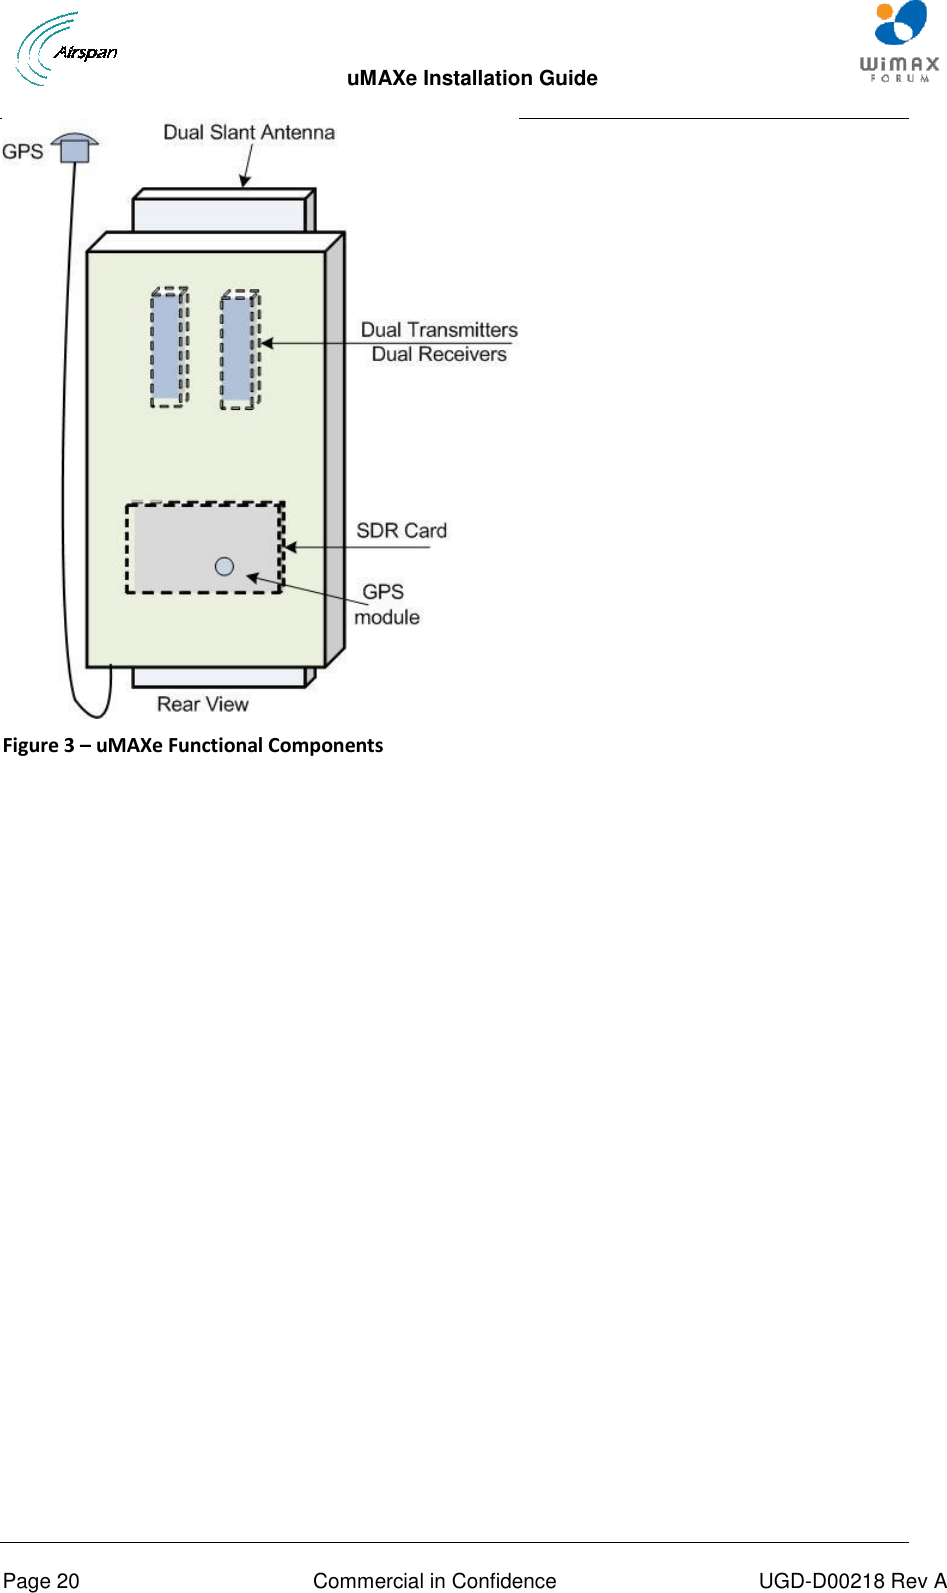  uMAXe Installation Guide       Page 20  Commercial in Confidence  UGD-D00218 Rev A  Figure 3 – uMAXe Functional Components   